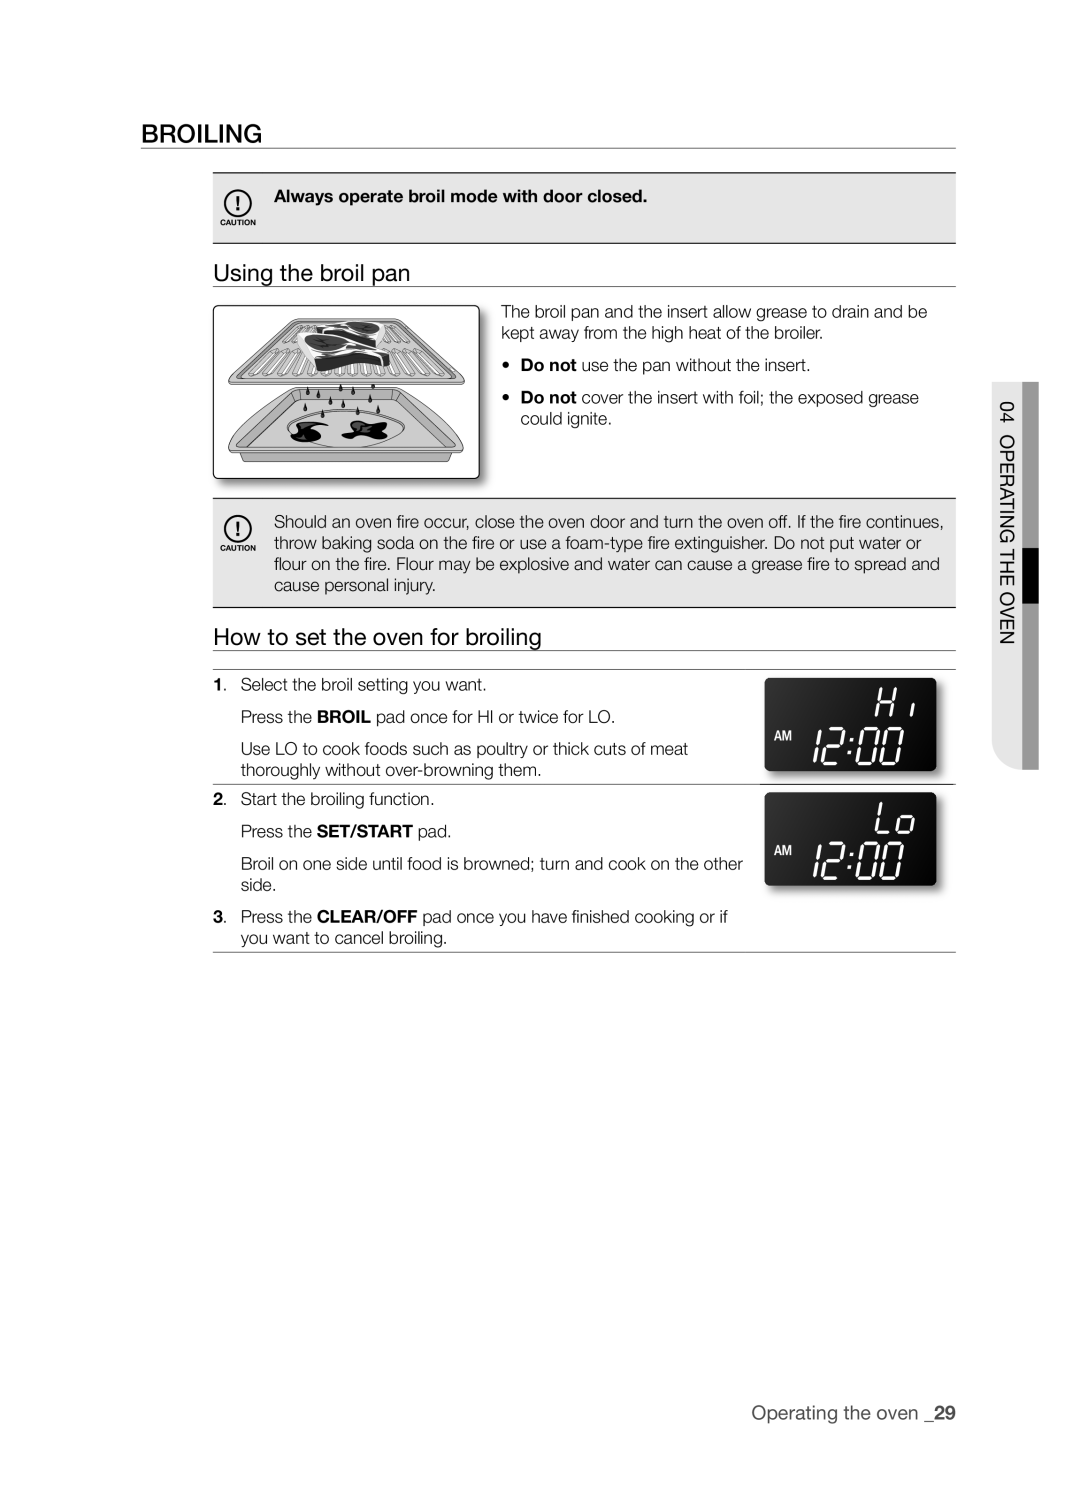 Samsung FTQ352IWX user manual Broiling, Using the broil pan, How to set the oven for broiling, Operating The Oven 